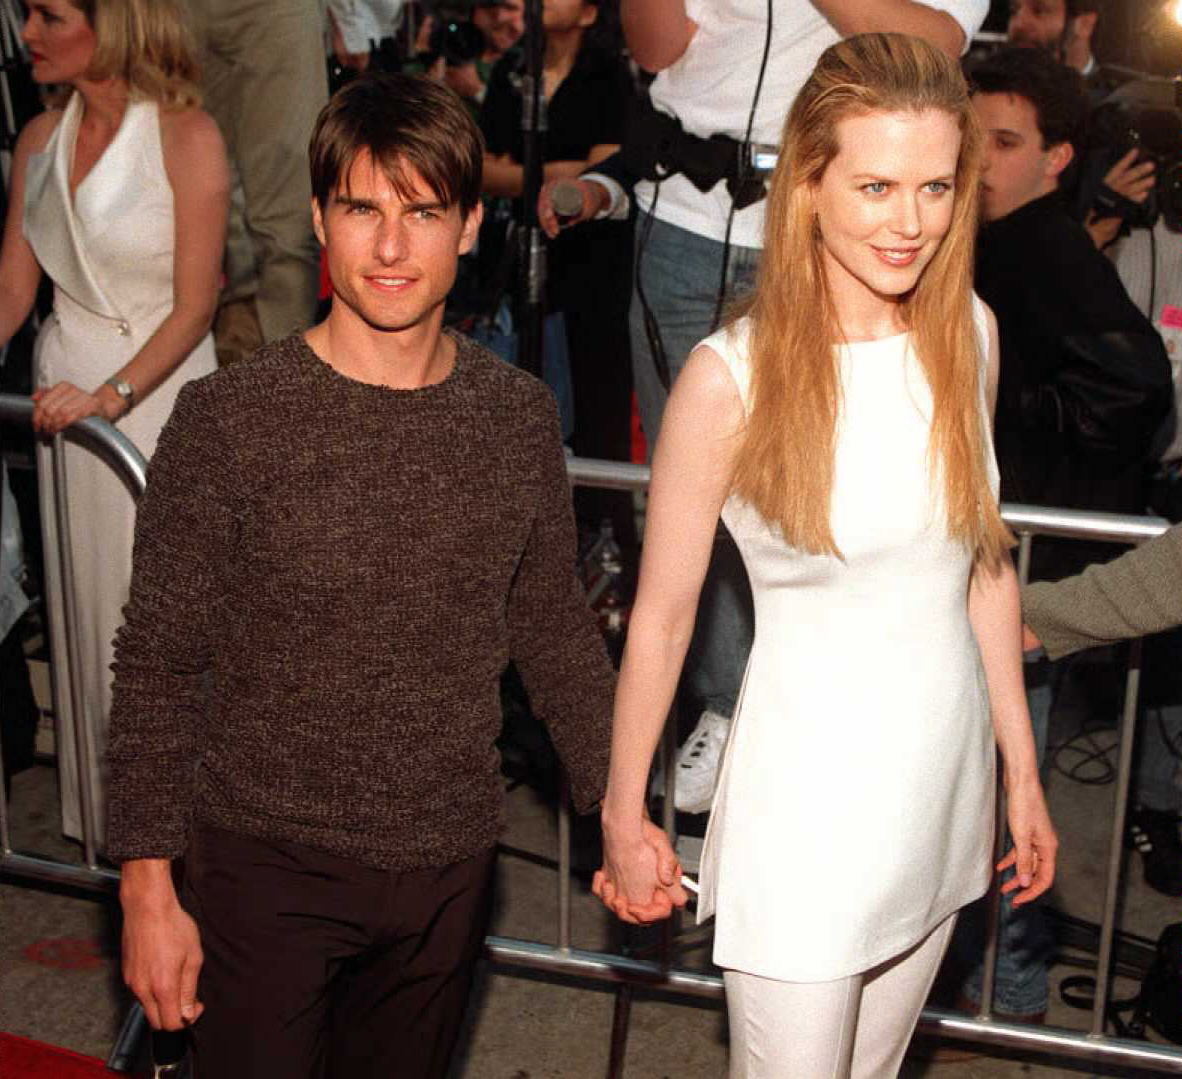 Tom Cruise and Nicole Kidman arrive for the premiere of 'Mission Impossible'